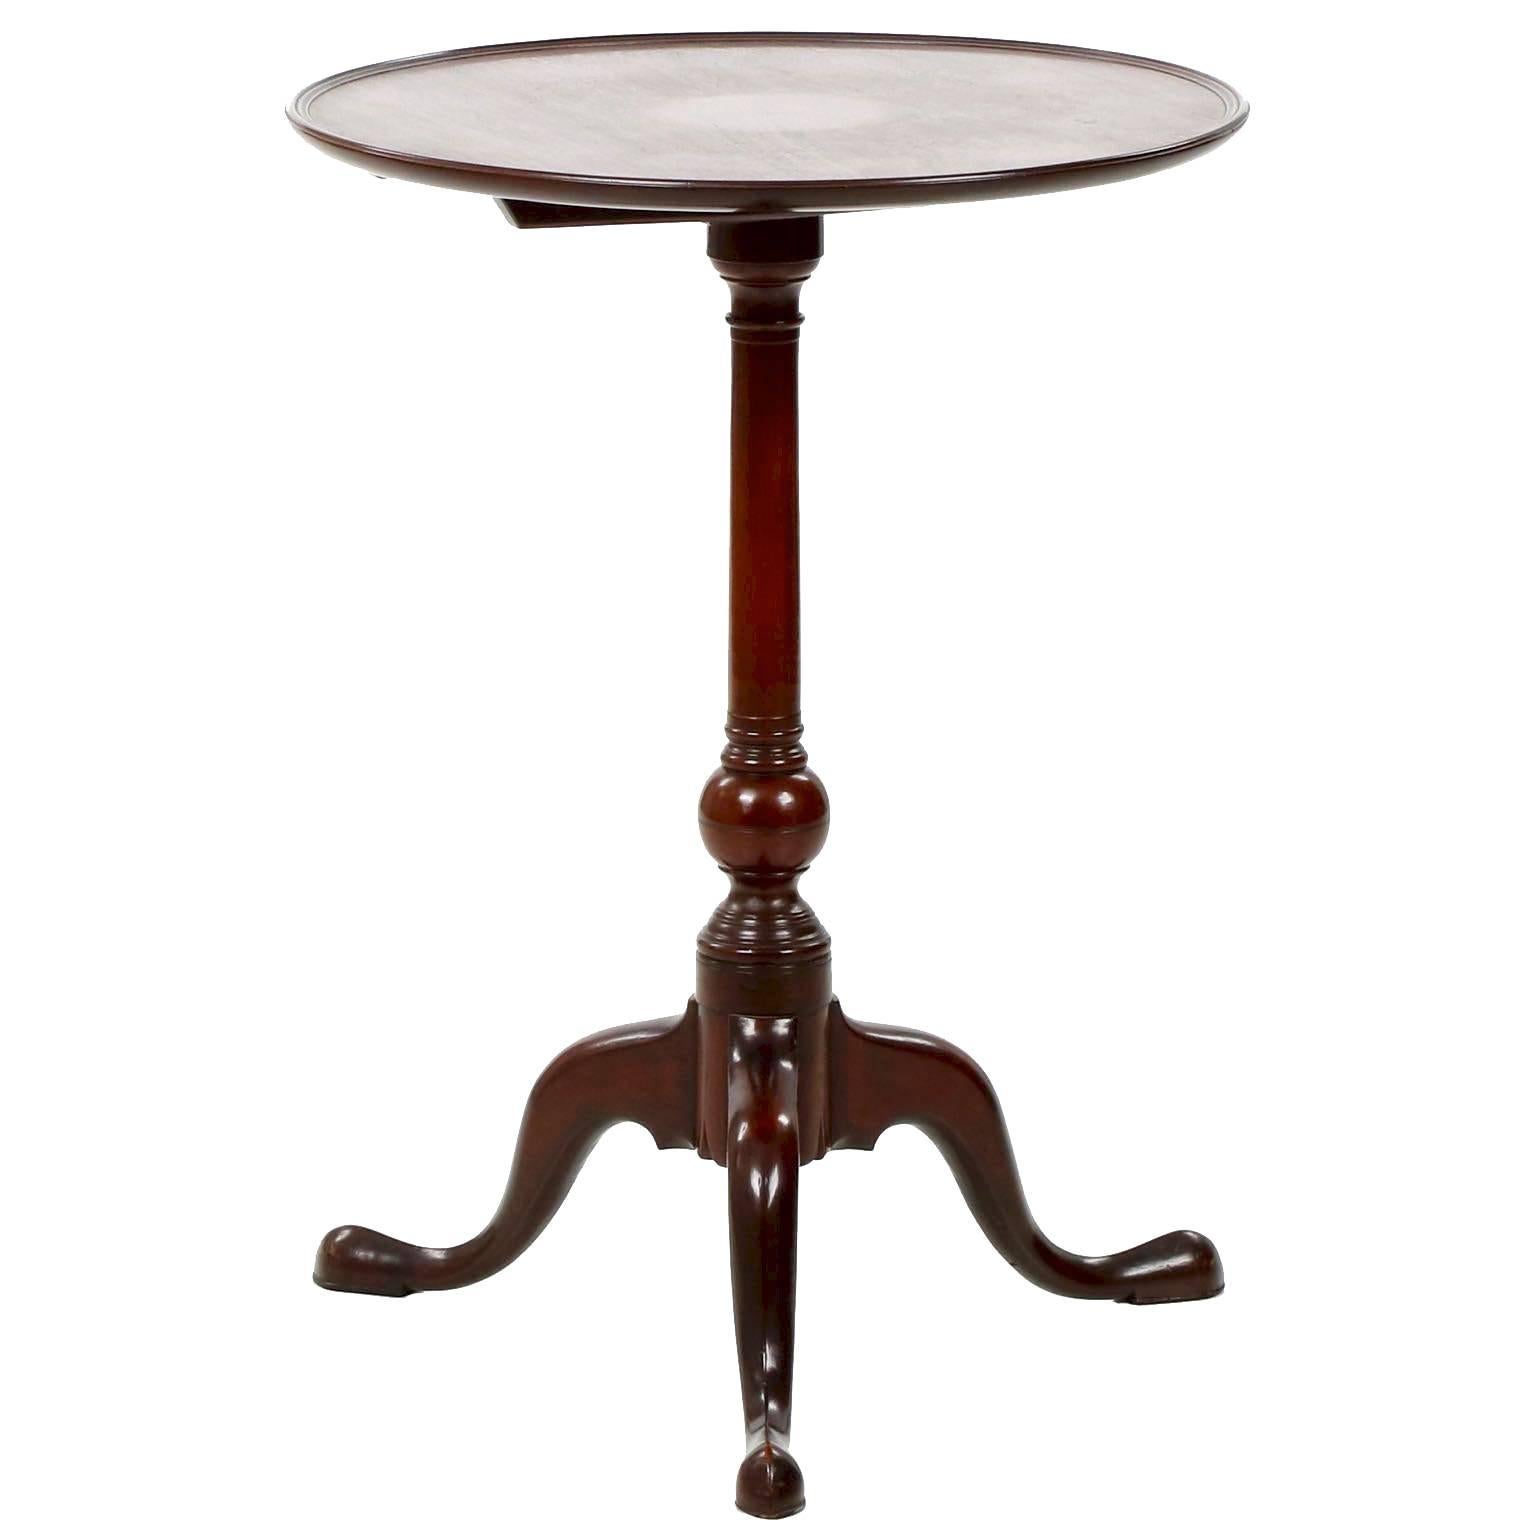 Philadelphia Queen Anne Mahogany Tilting Candle Stand W/ Suppressed Ball